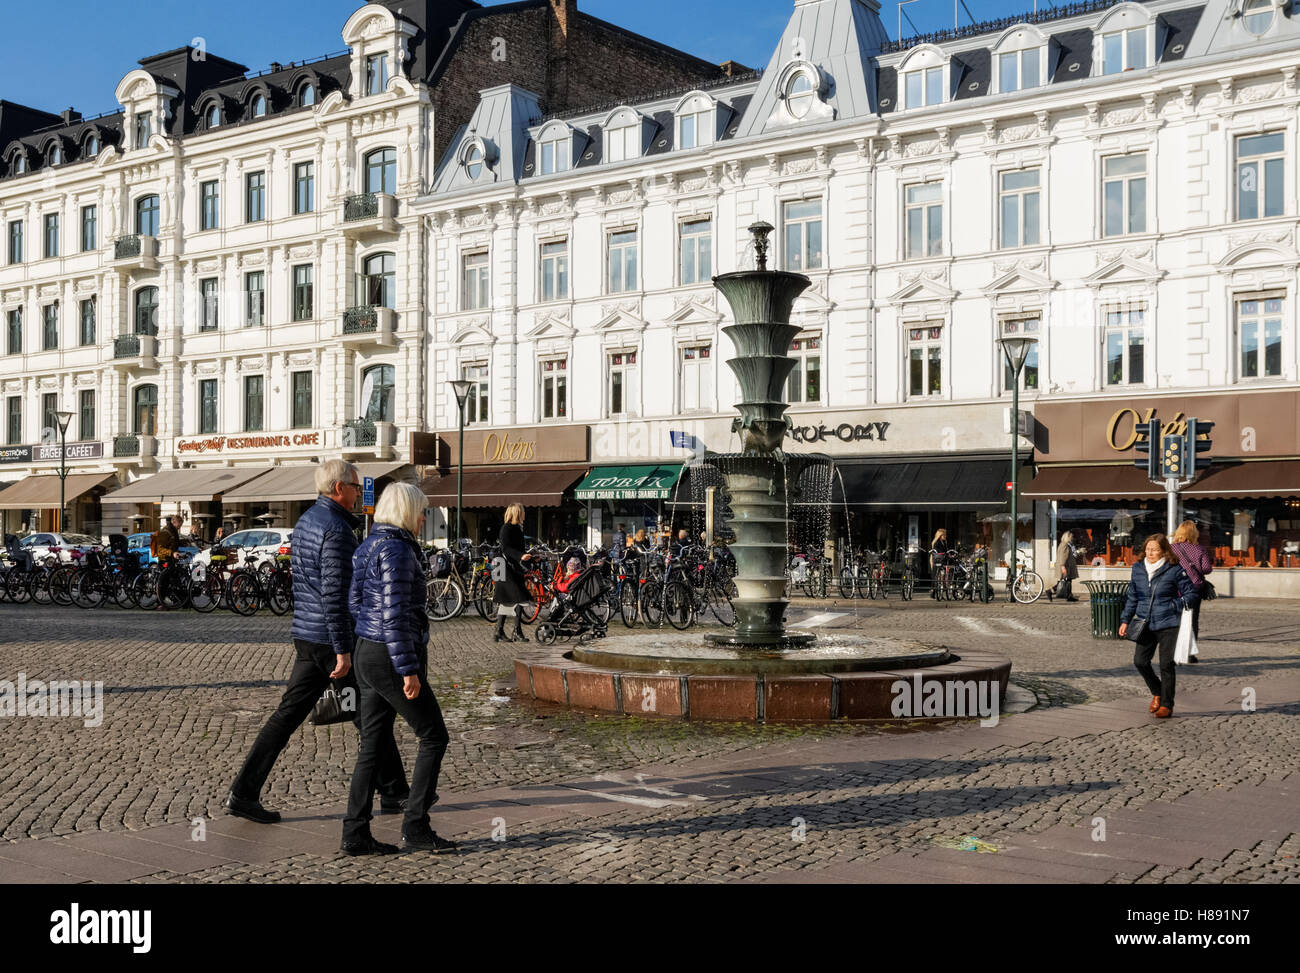 Malmo Market High Resolution Stock Photography and Images - Alamy